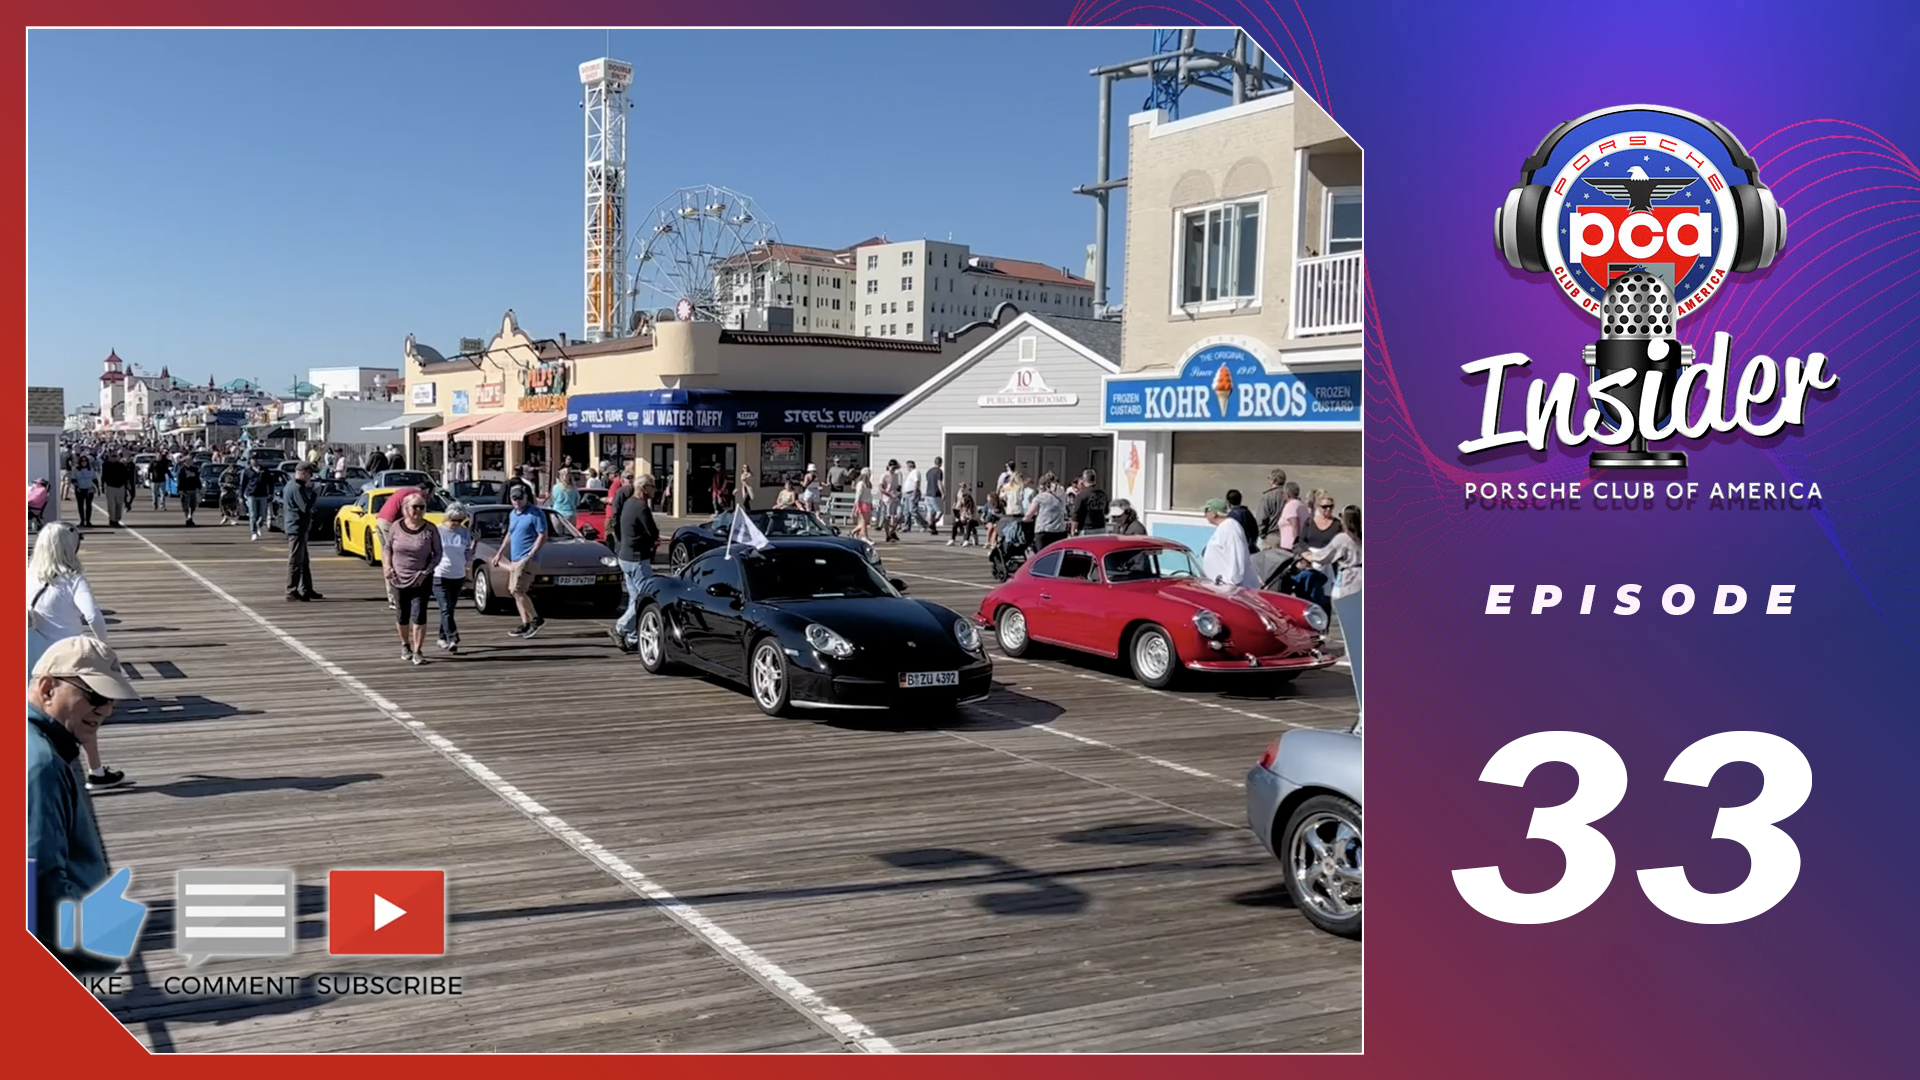 Over 360 Porsches Took Over The Boardwalk in New Jersey